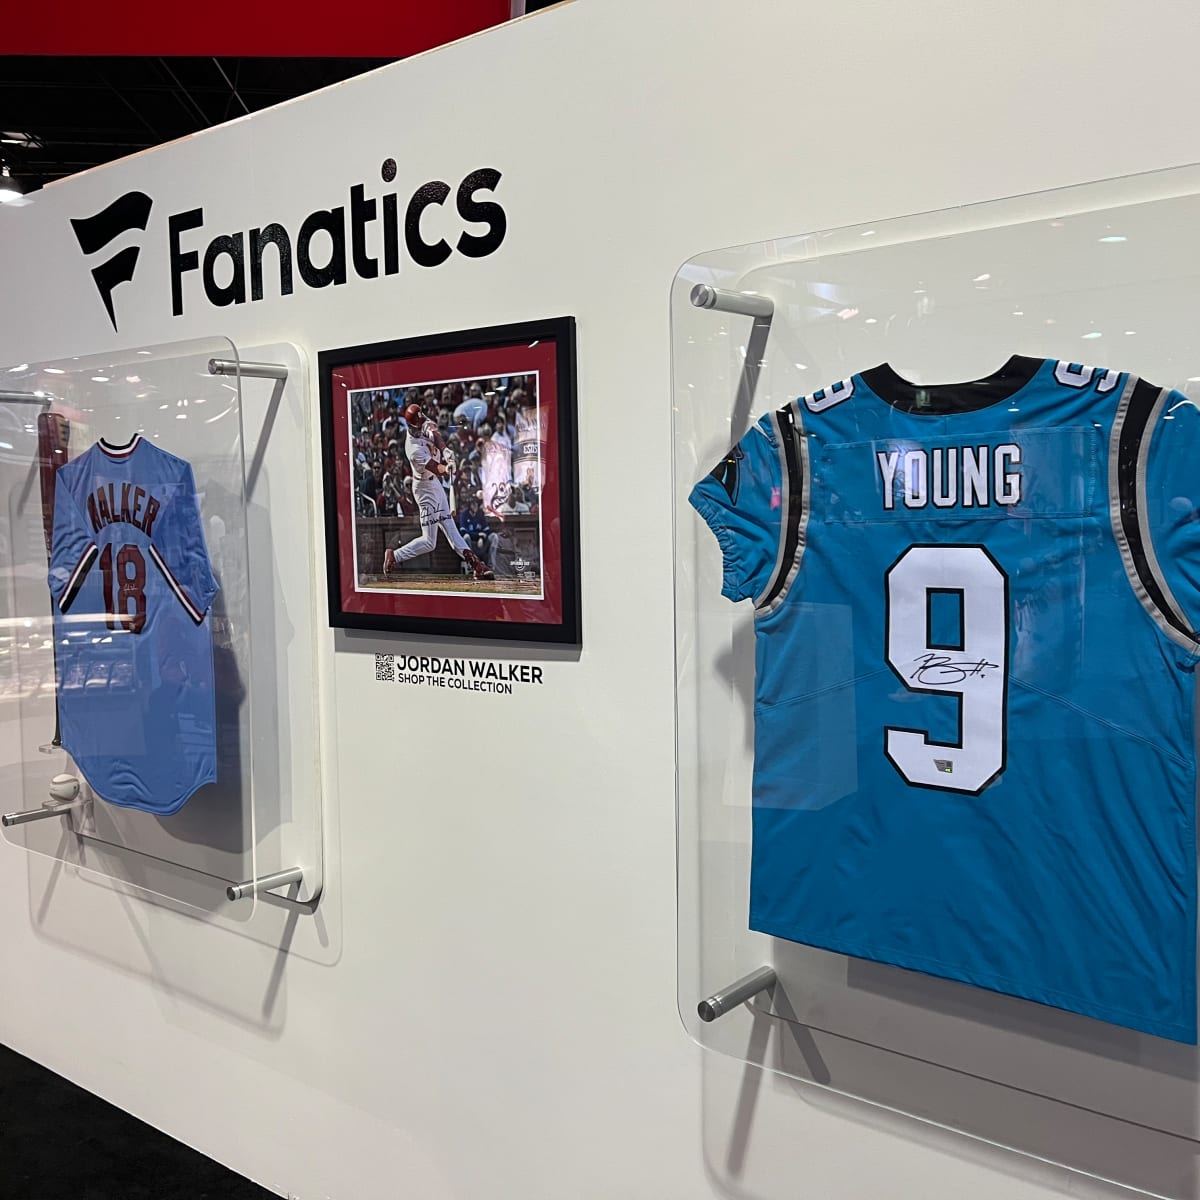 The NFL and Nike sign a 10-year licensing deal with Fanatics - Vox